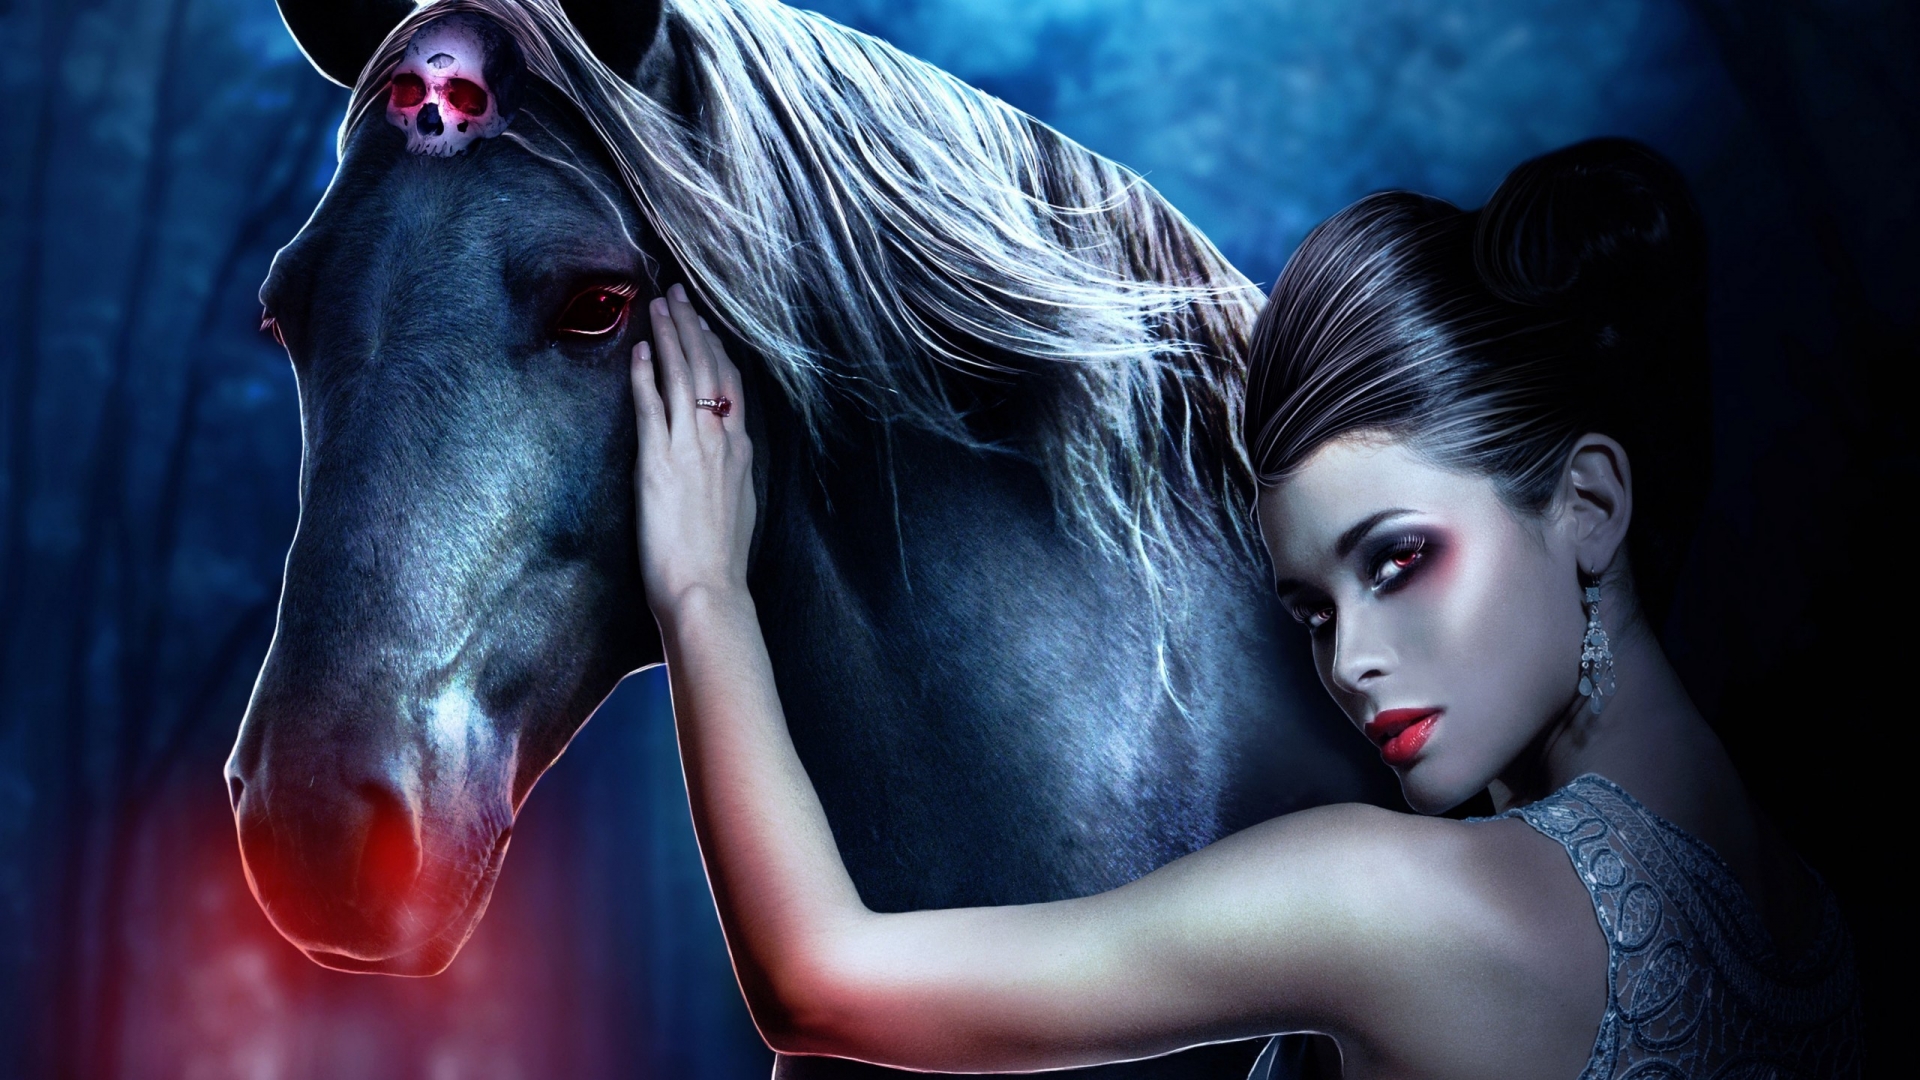 Beautiful Woman and Horse for 1920 x 1080 HDTV 1080p resolution